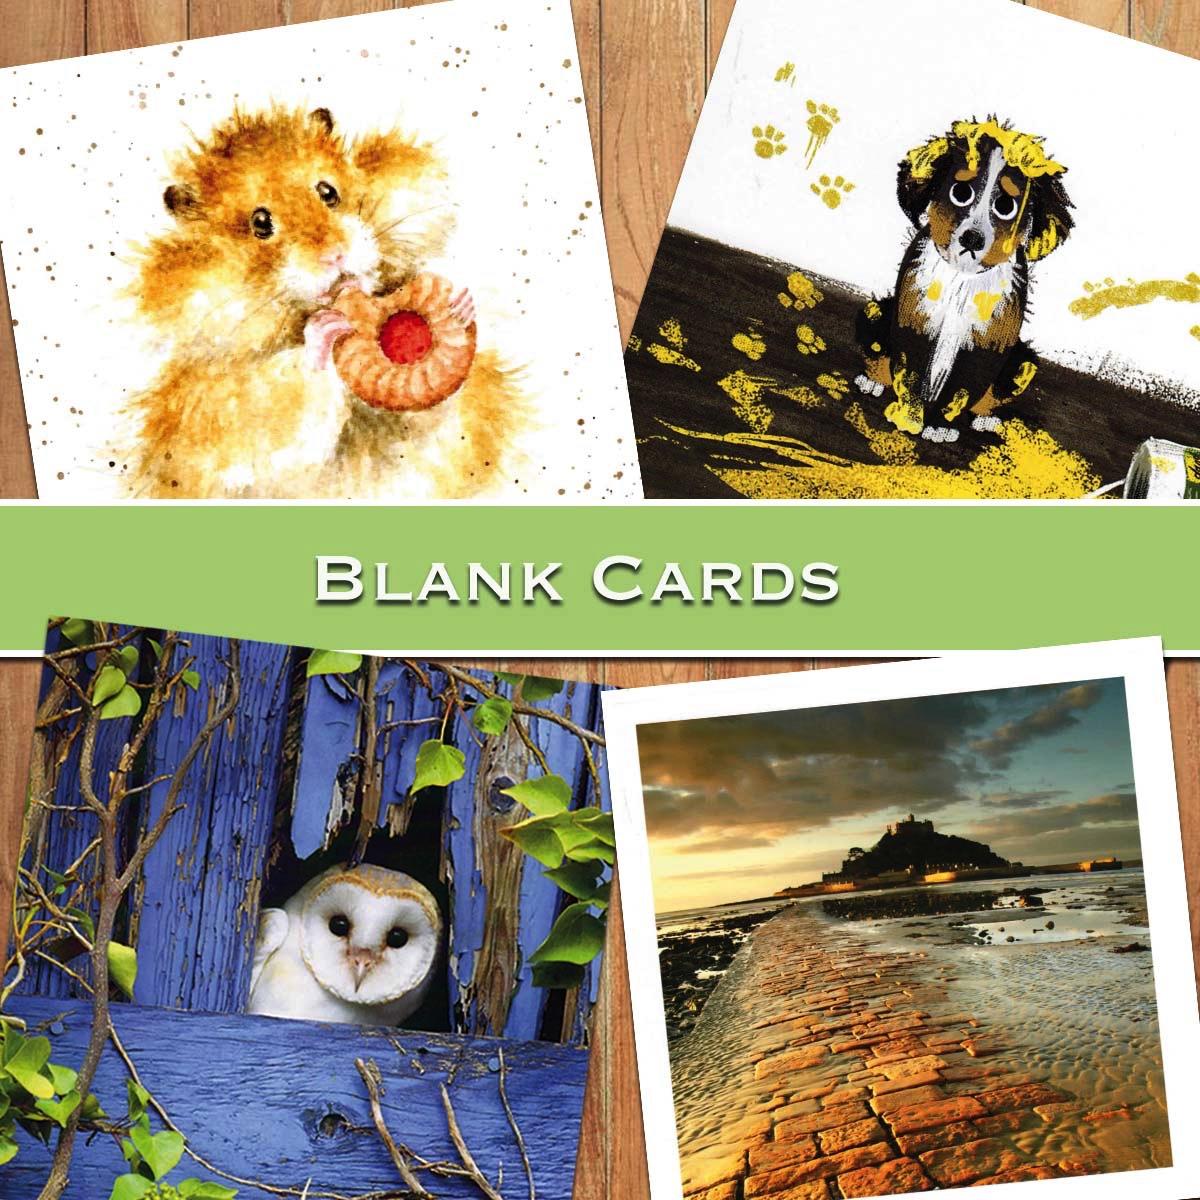 A Mixed Selection Of Cards To Show The Depth Of Range In Our Blank Cards Section